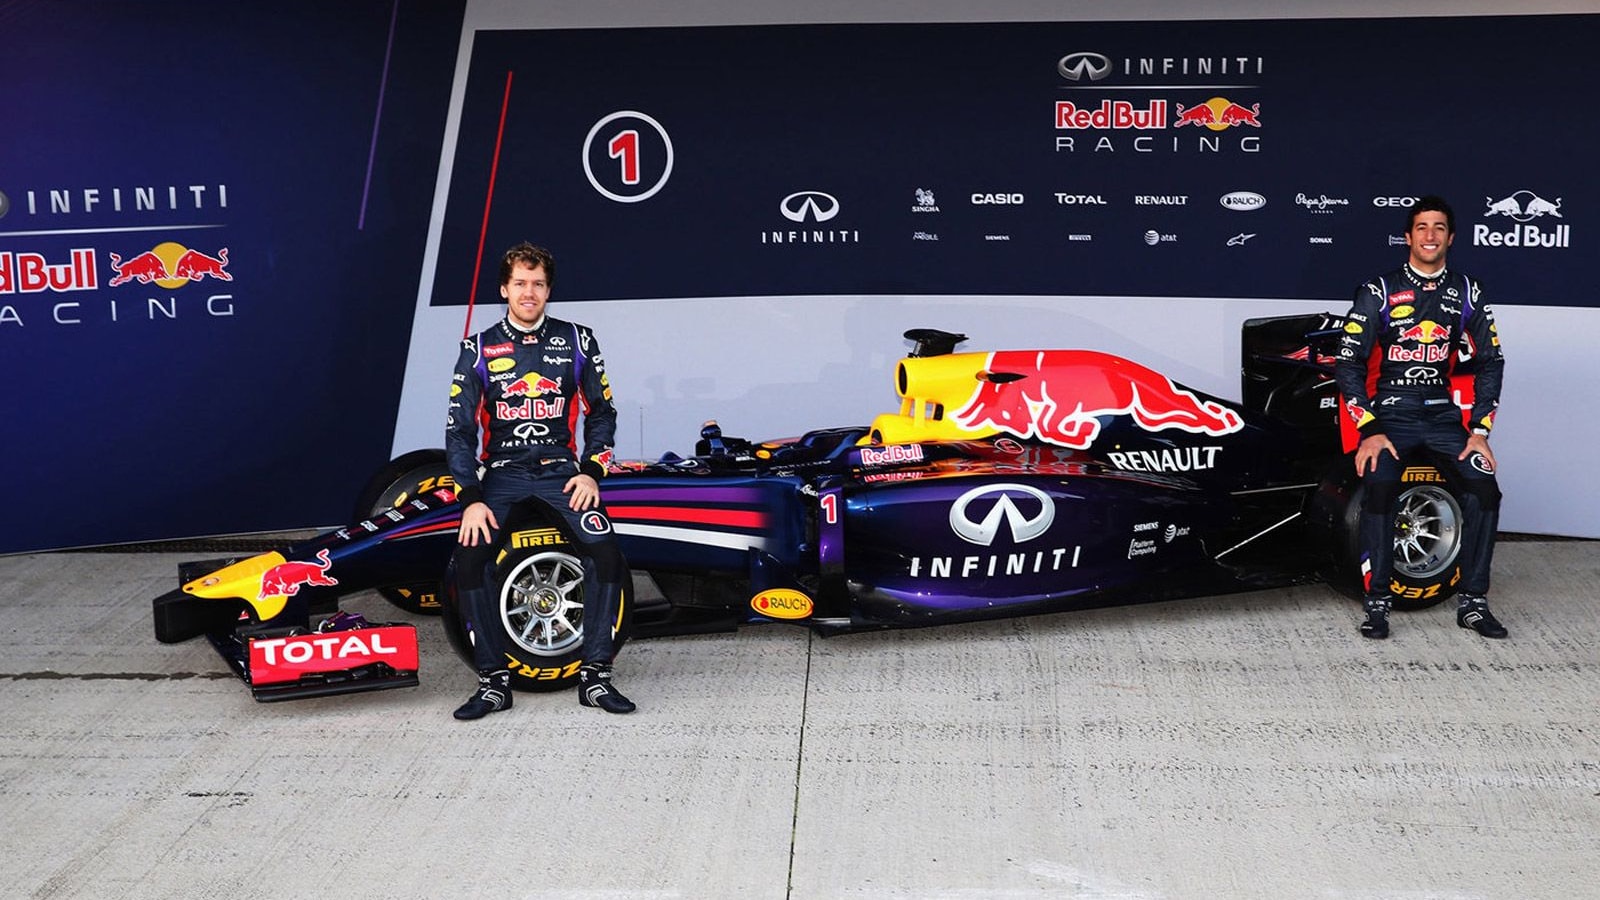 Red Bull Racing’s RB10 2014 Formula One car